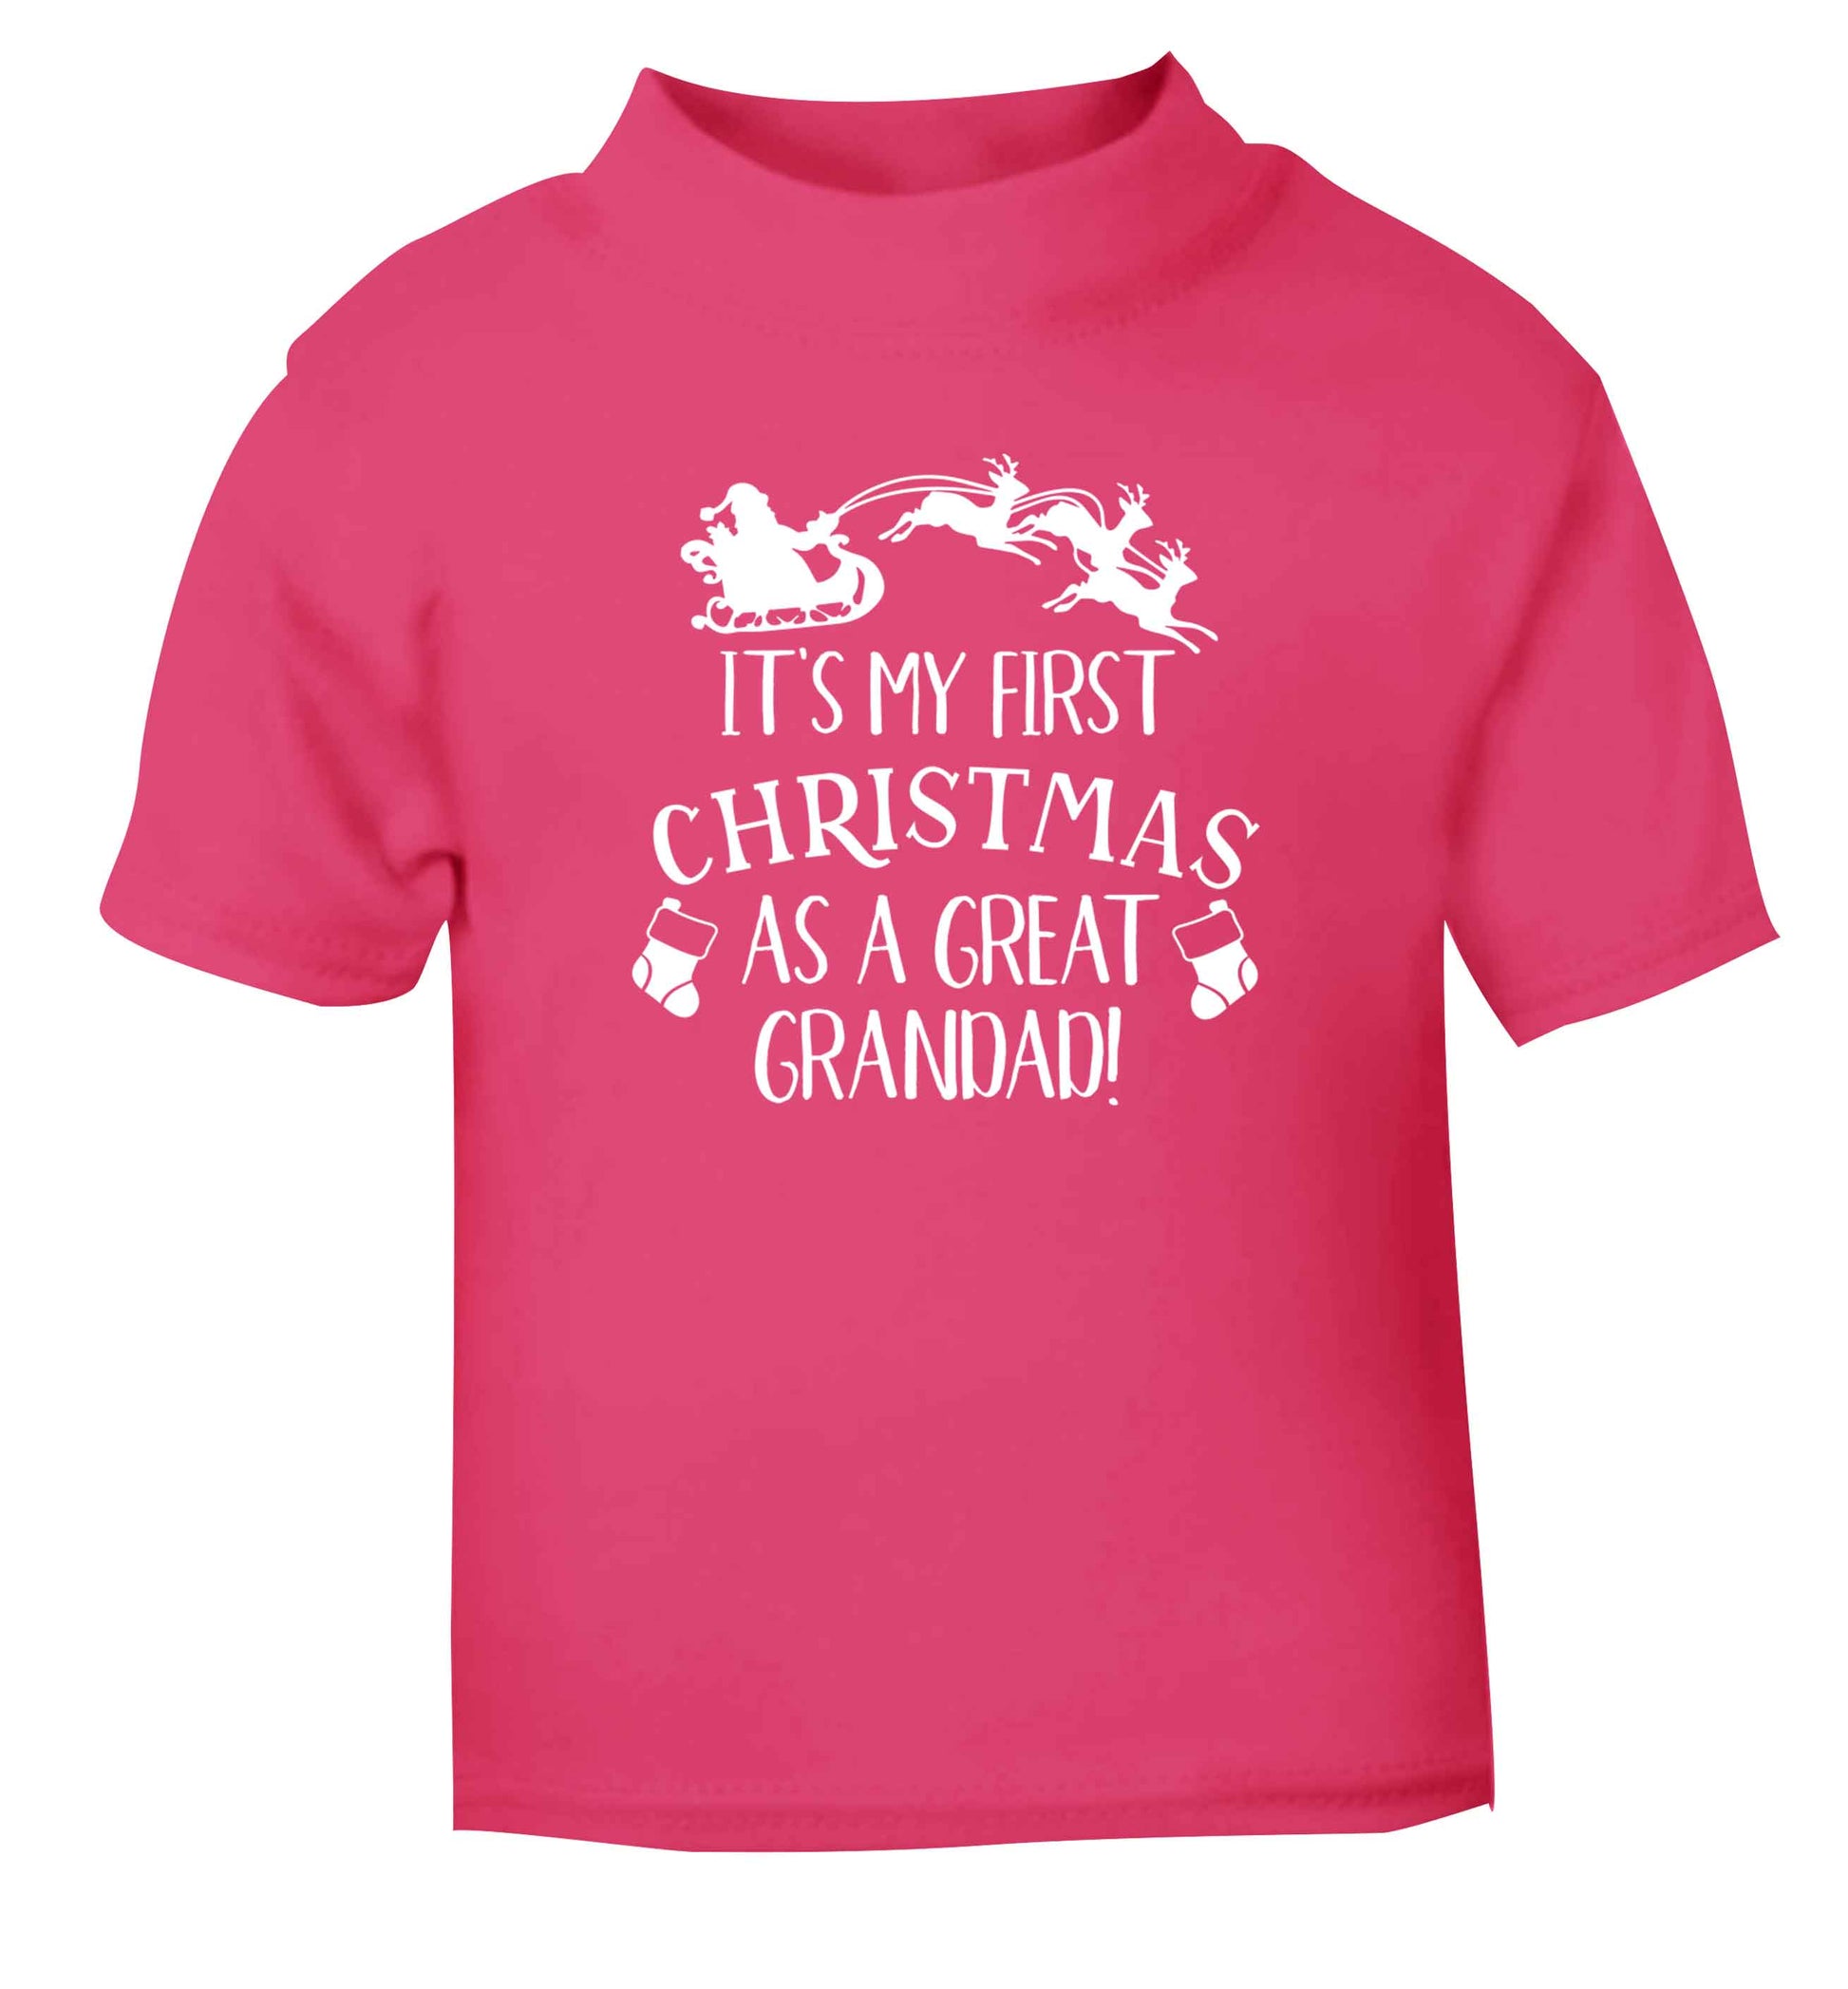 It's my first Christmas as a great grandad! pink Baby Toddler Tshirt 2 Years